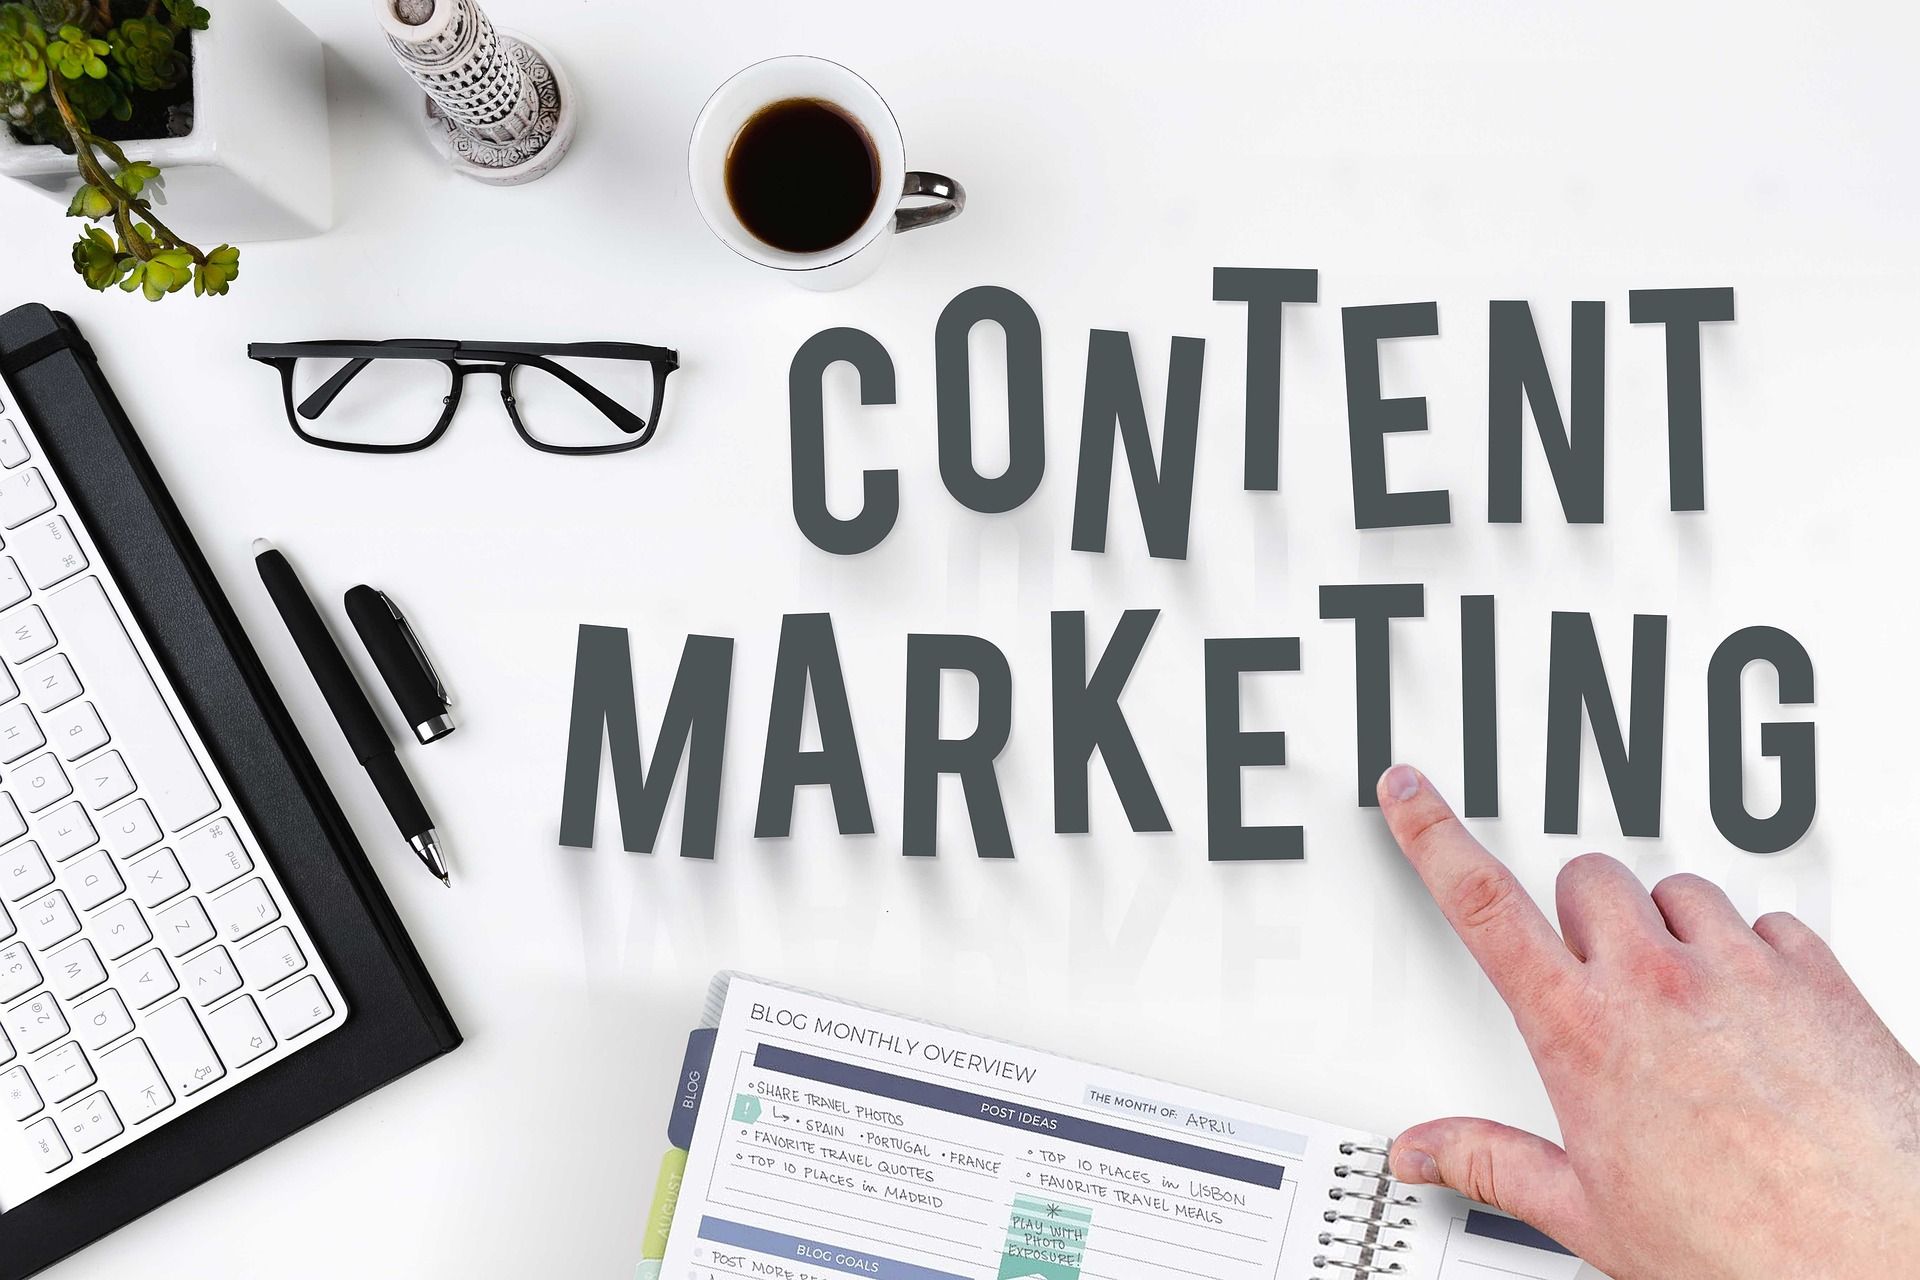 Boost your content marketing game with these 5 quick strategies